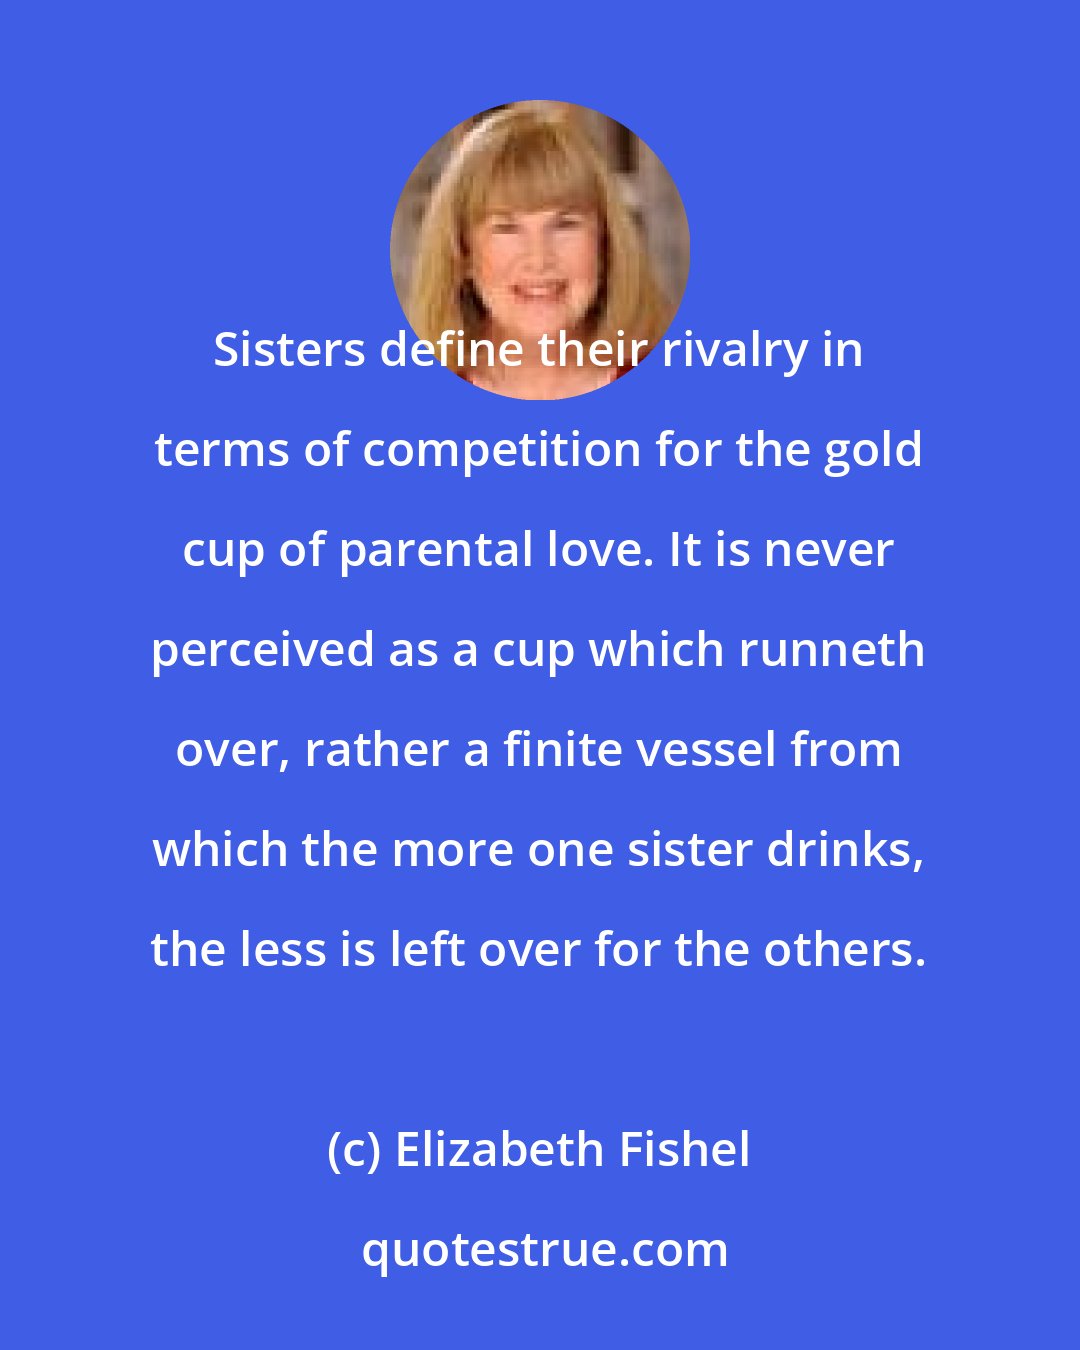 Elizabeth Fishel: Sisters define their rivalry in terms of competition for the gold cup of parental love. It is never perceived as a cup which runneth over, rather a finite vessel from which the more one sister drinks, the less is left over for the others.